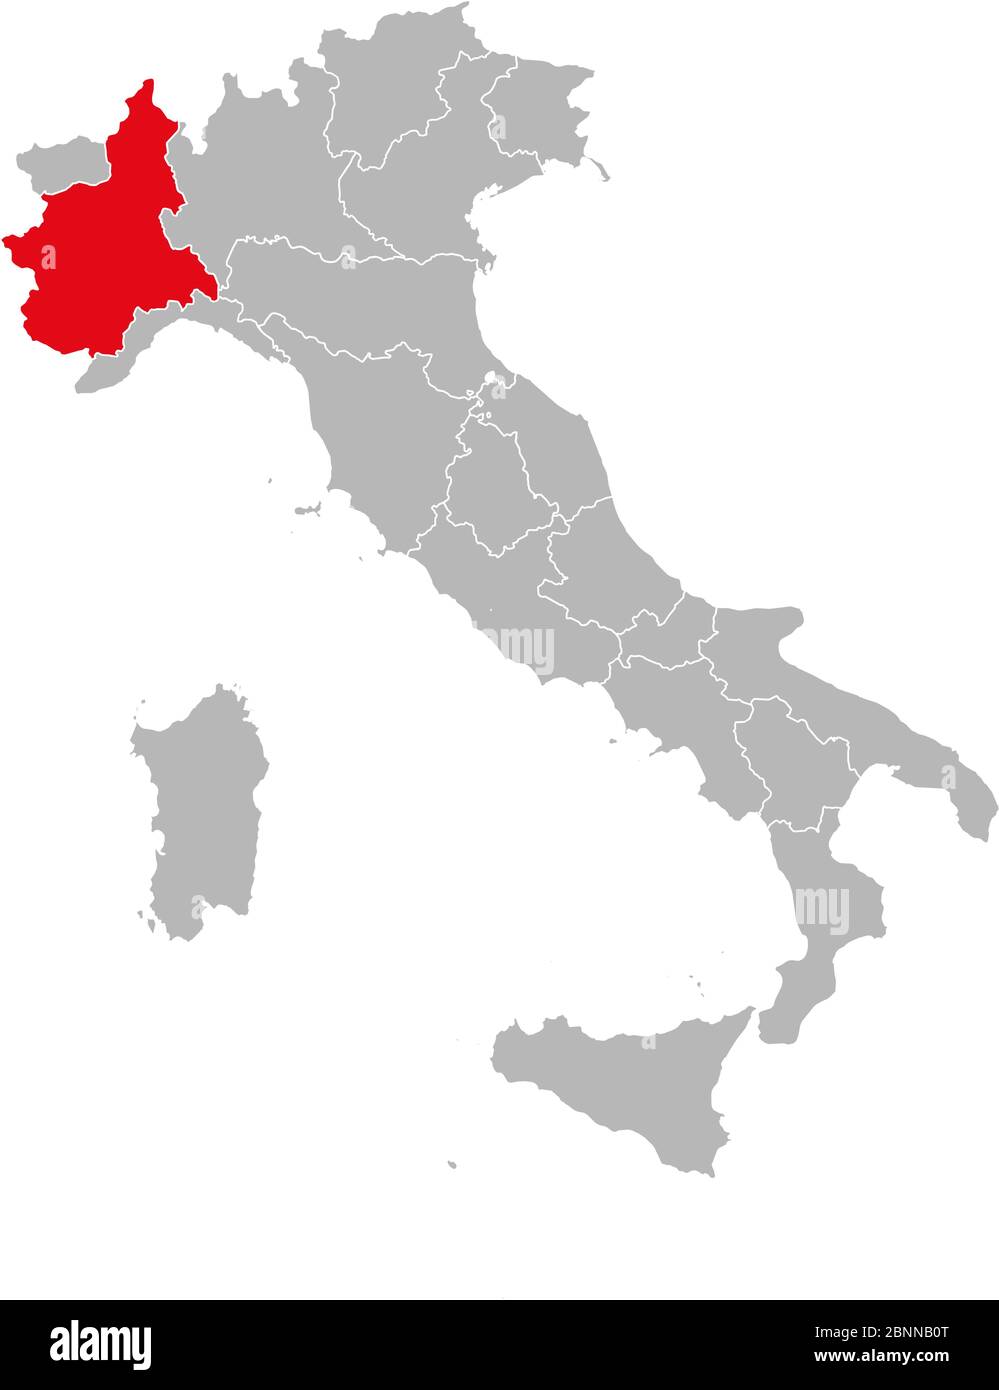 Piedmont region highlighted red on Italy map vector. Gray background. Stock Vector